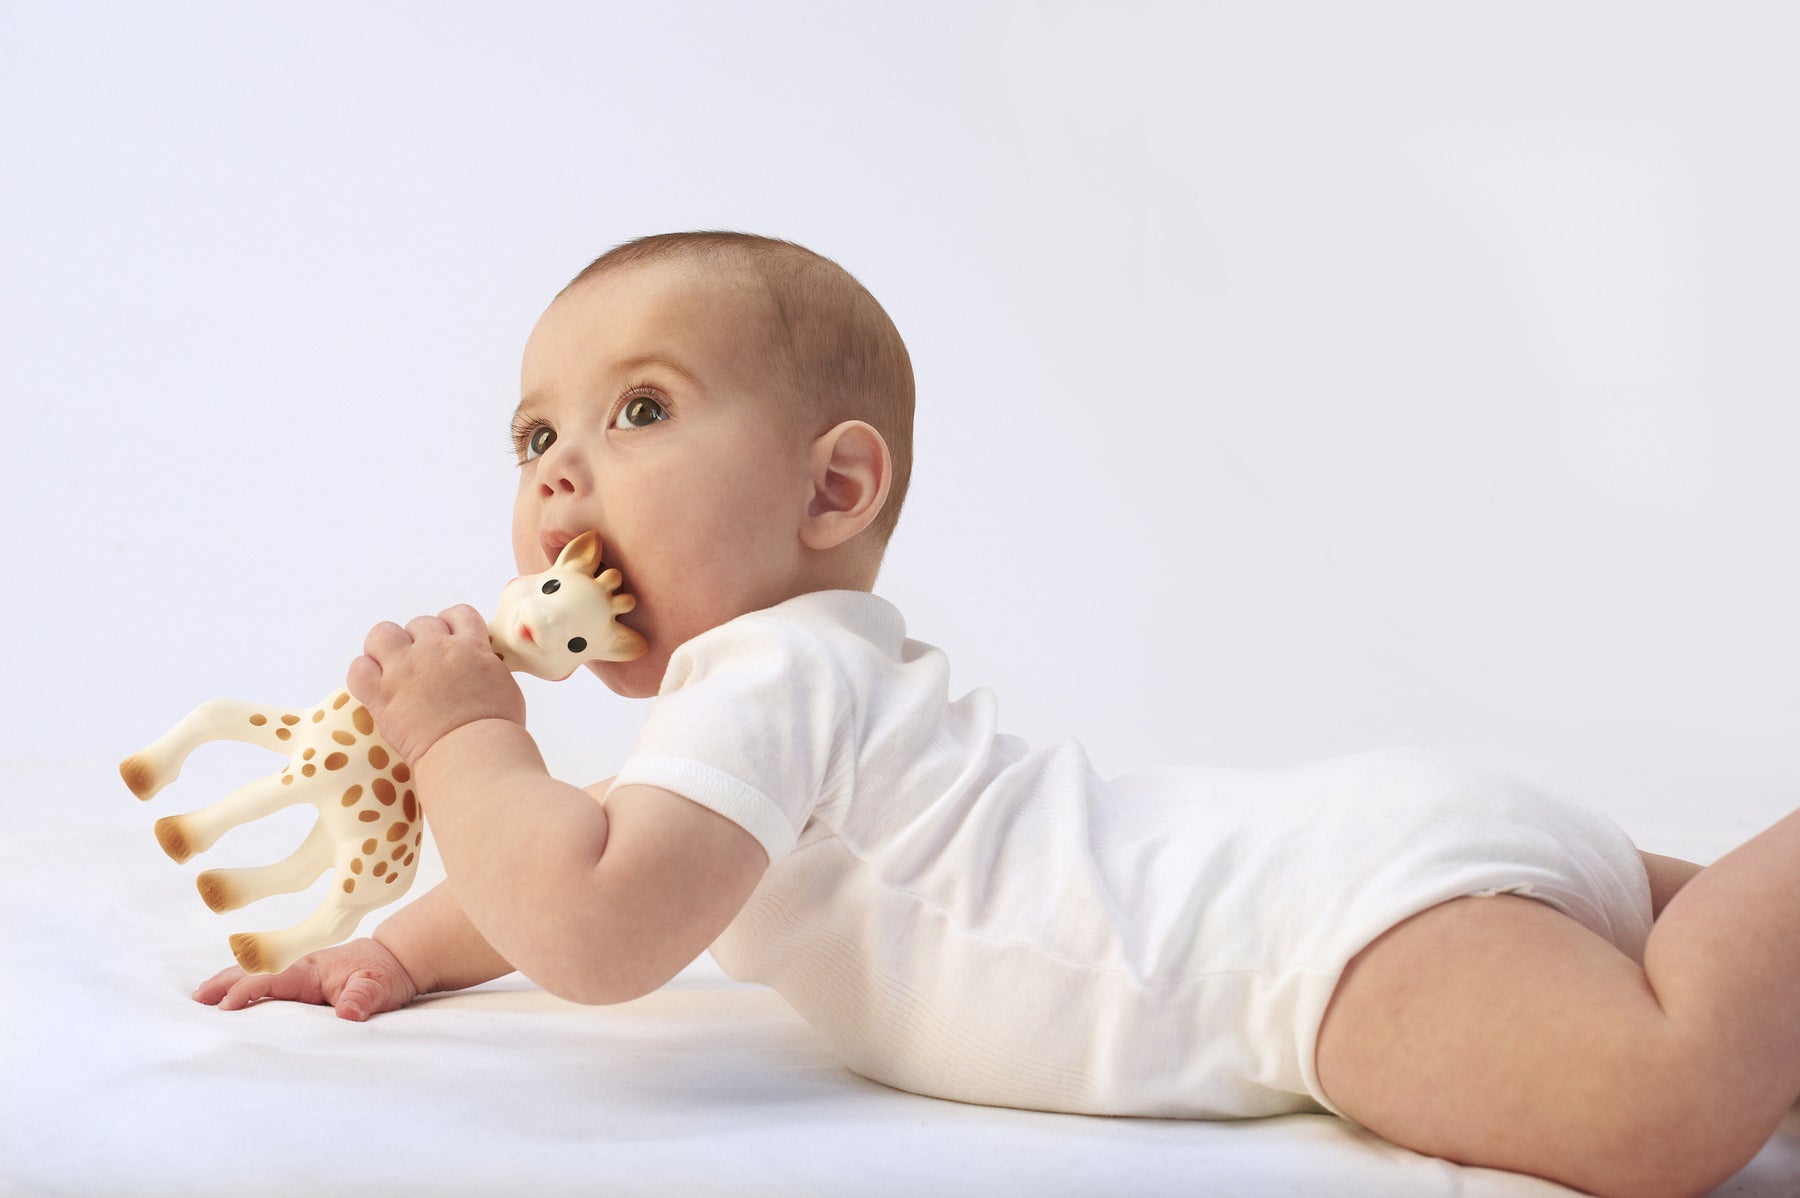 The Teether Review - Toofeze or Sophie the Giraffe?